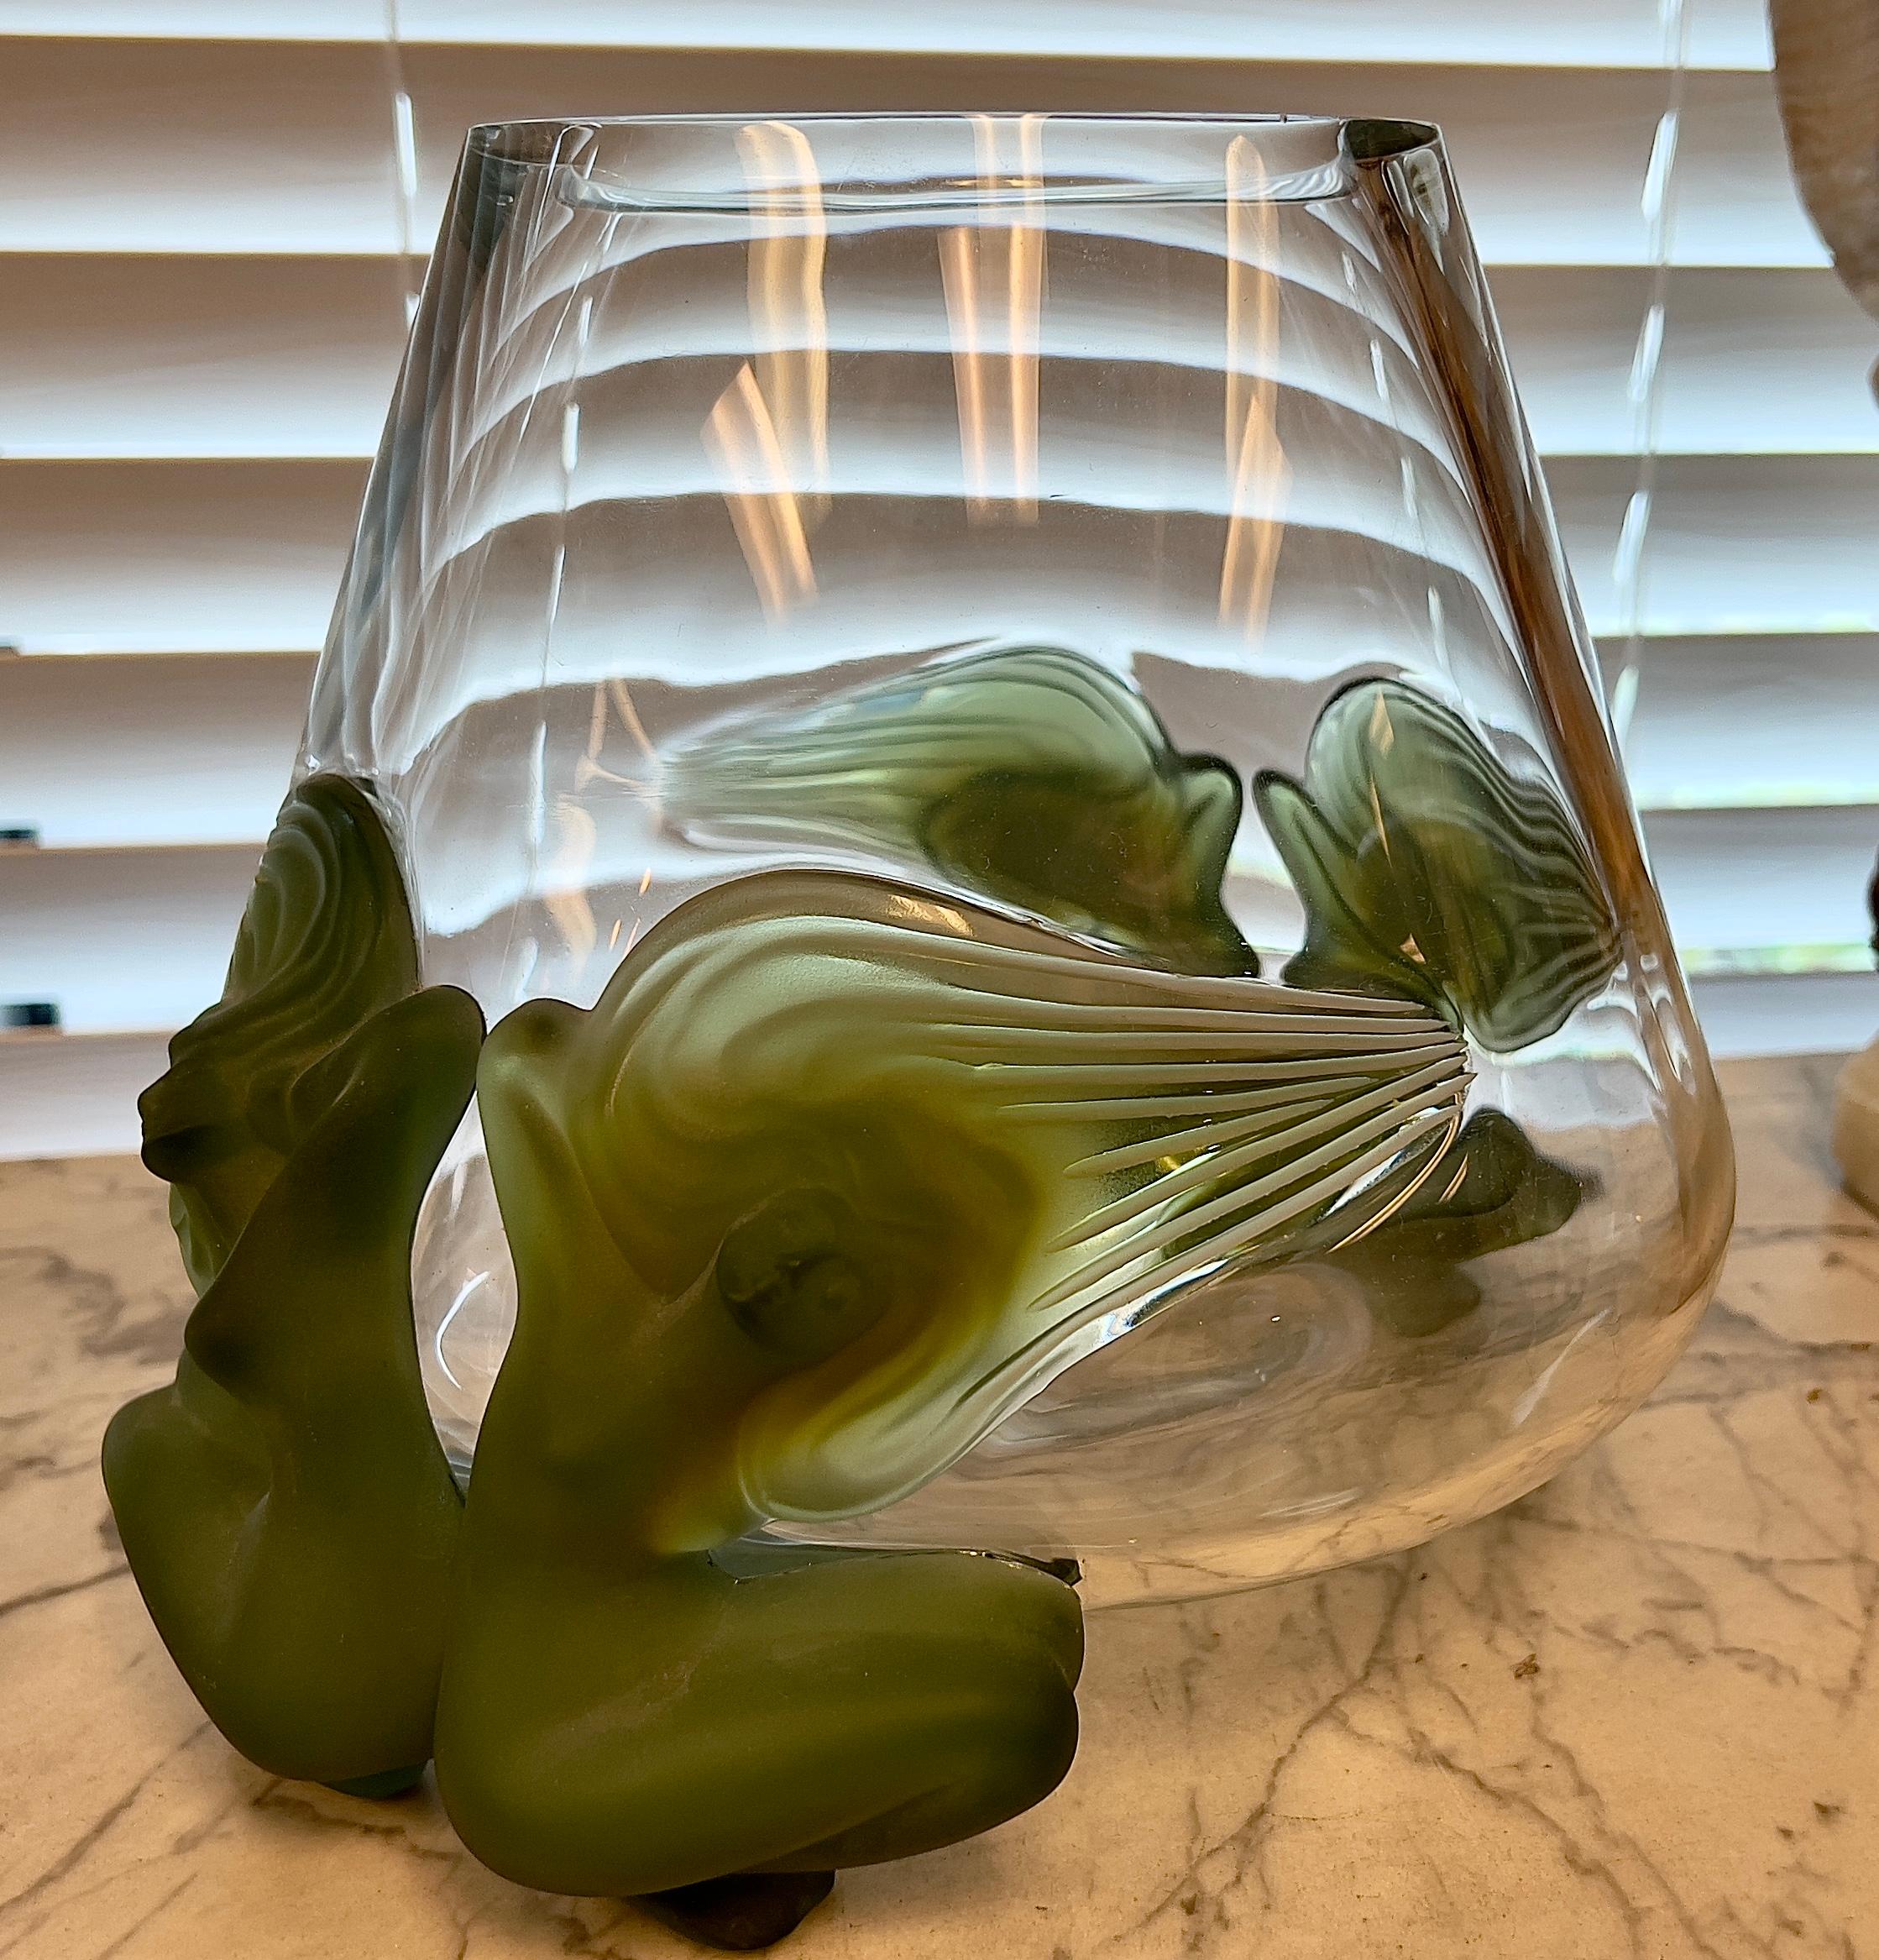 A Lalique Antinea pattern glass vase tapering cylindrical, moulded with opaline jade glass nymphs, engraved with 'Lalique France' at base.

Dimensions:
Hight: 9